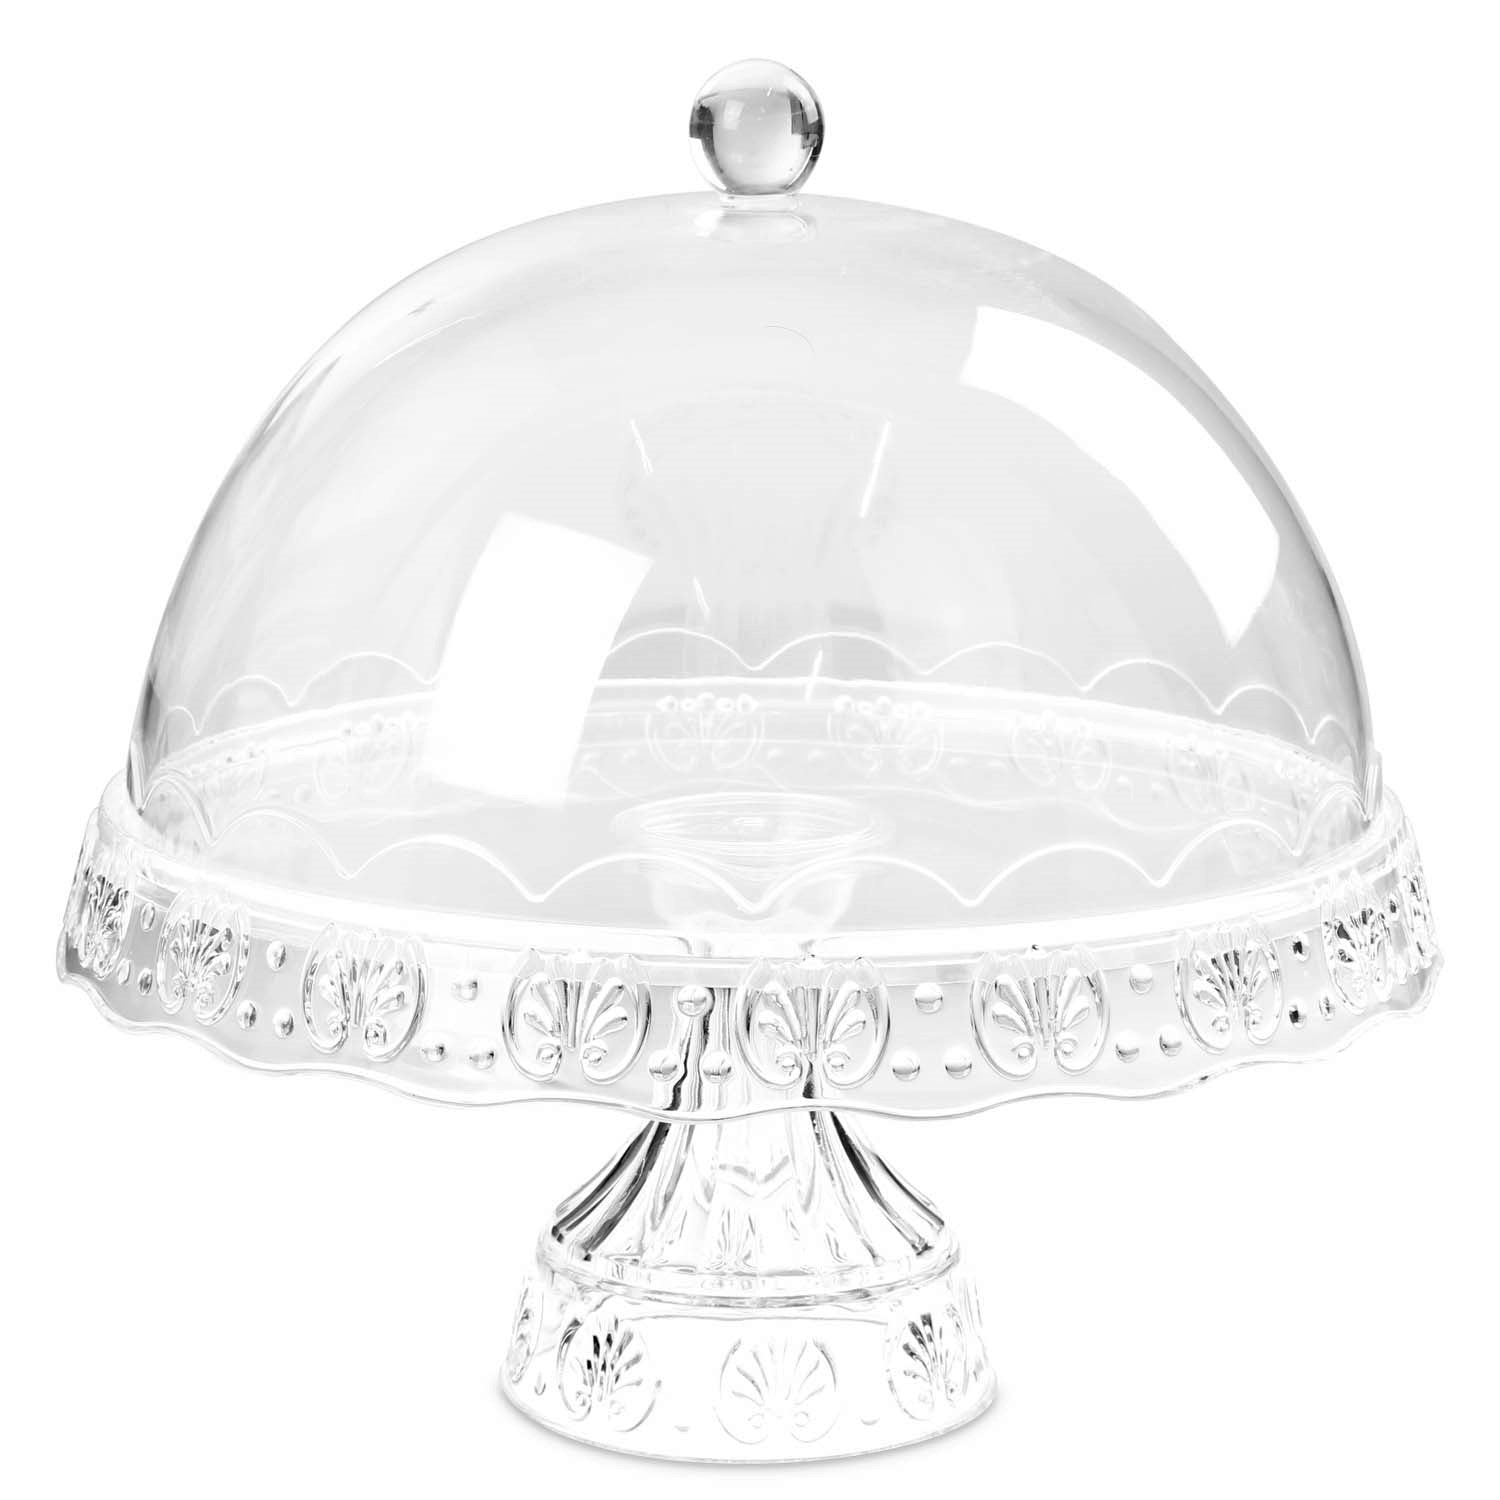 Cake Stand With Dome Cover 1 Tier Display